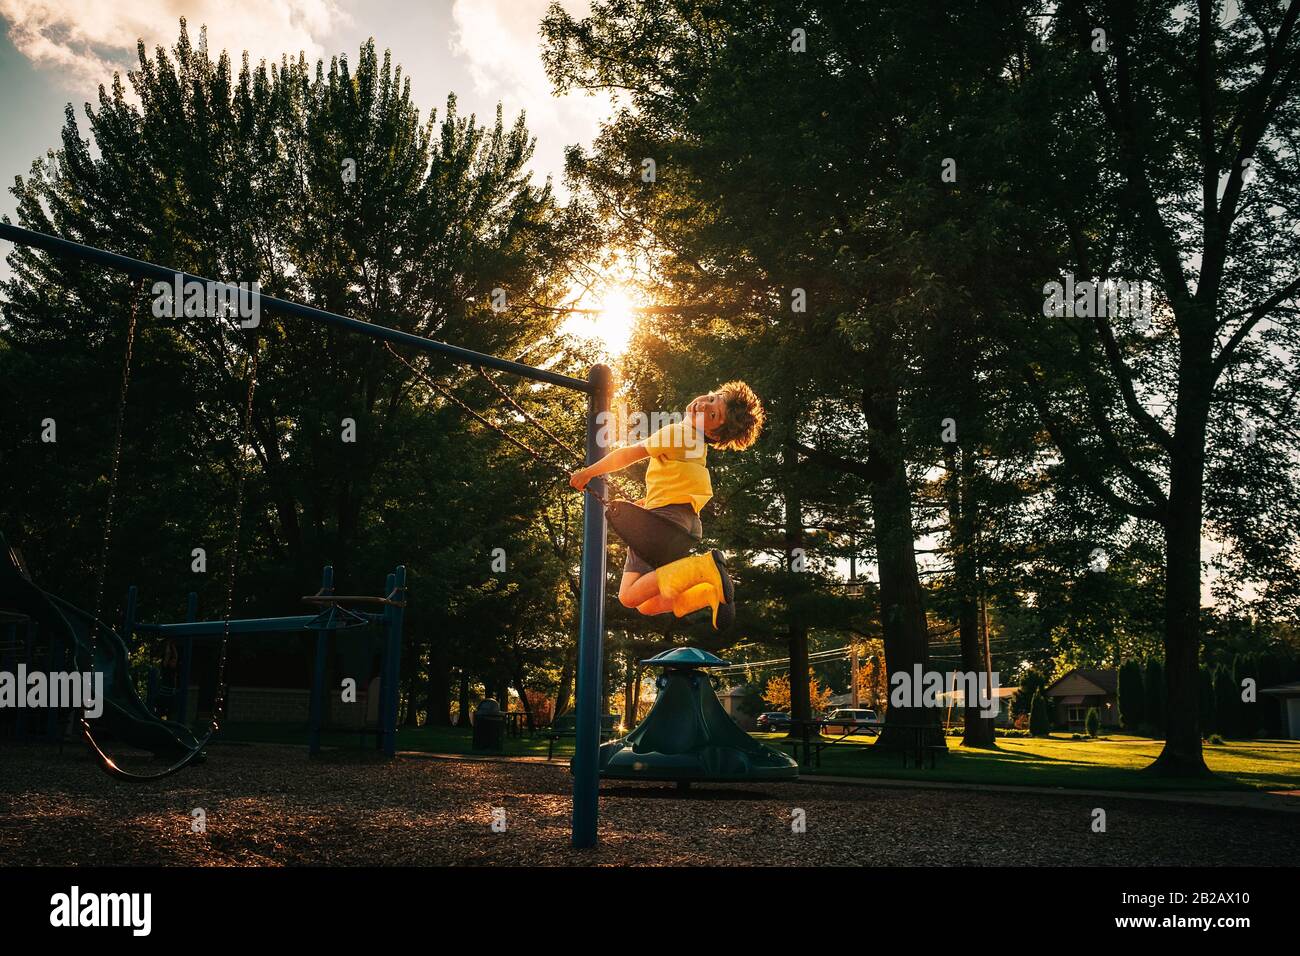 Boy swinging on a swing in a park, USA Stock Photo